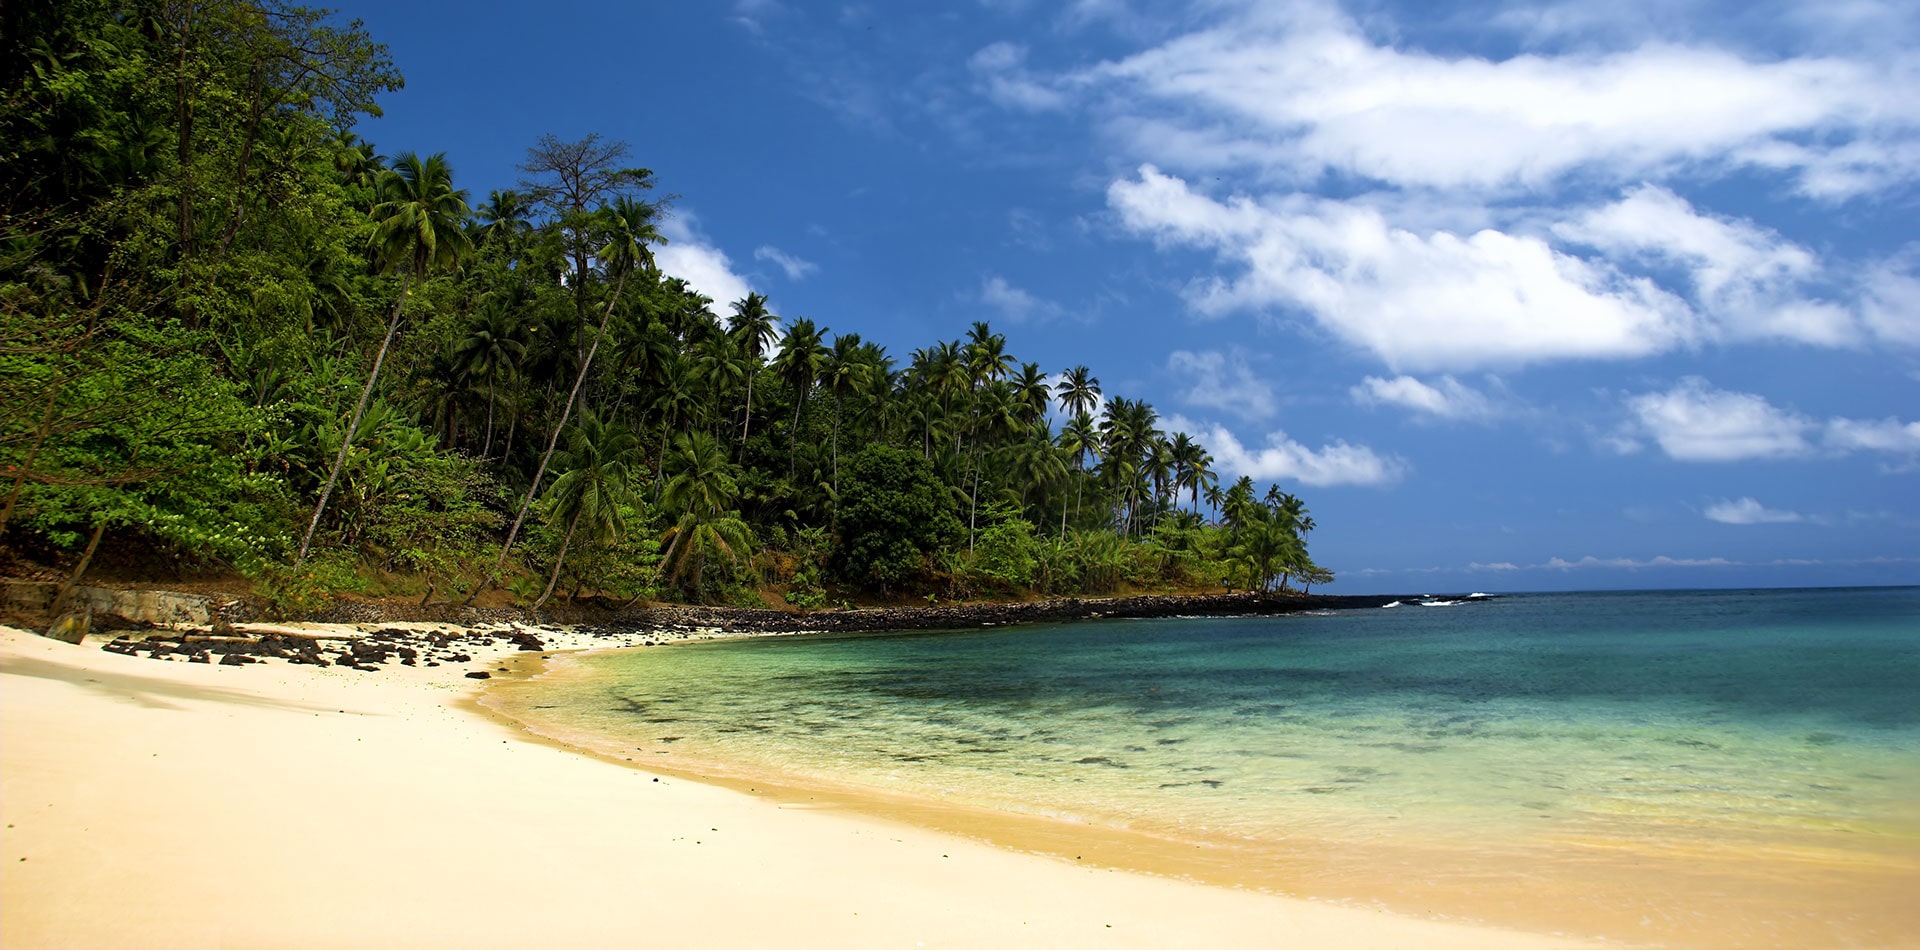 Beautiful beach with a great blue sky and turqoise water in Sao Tome